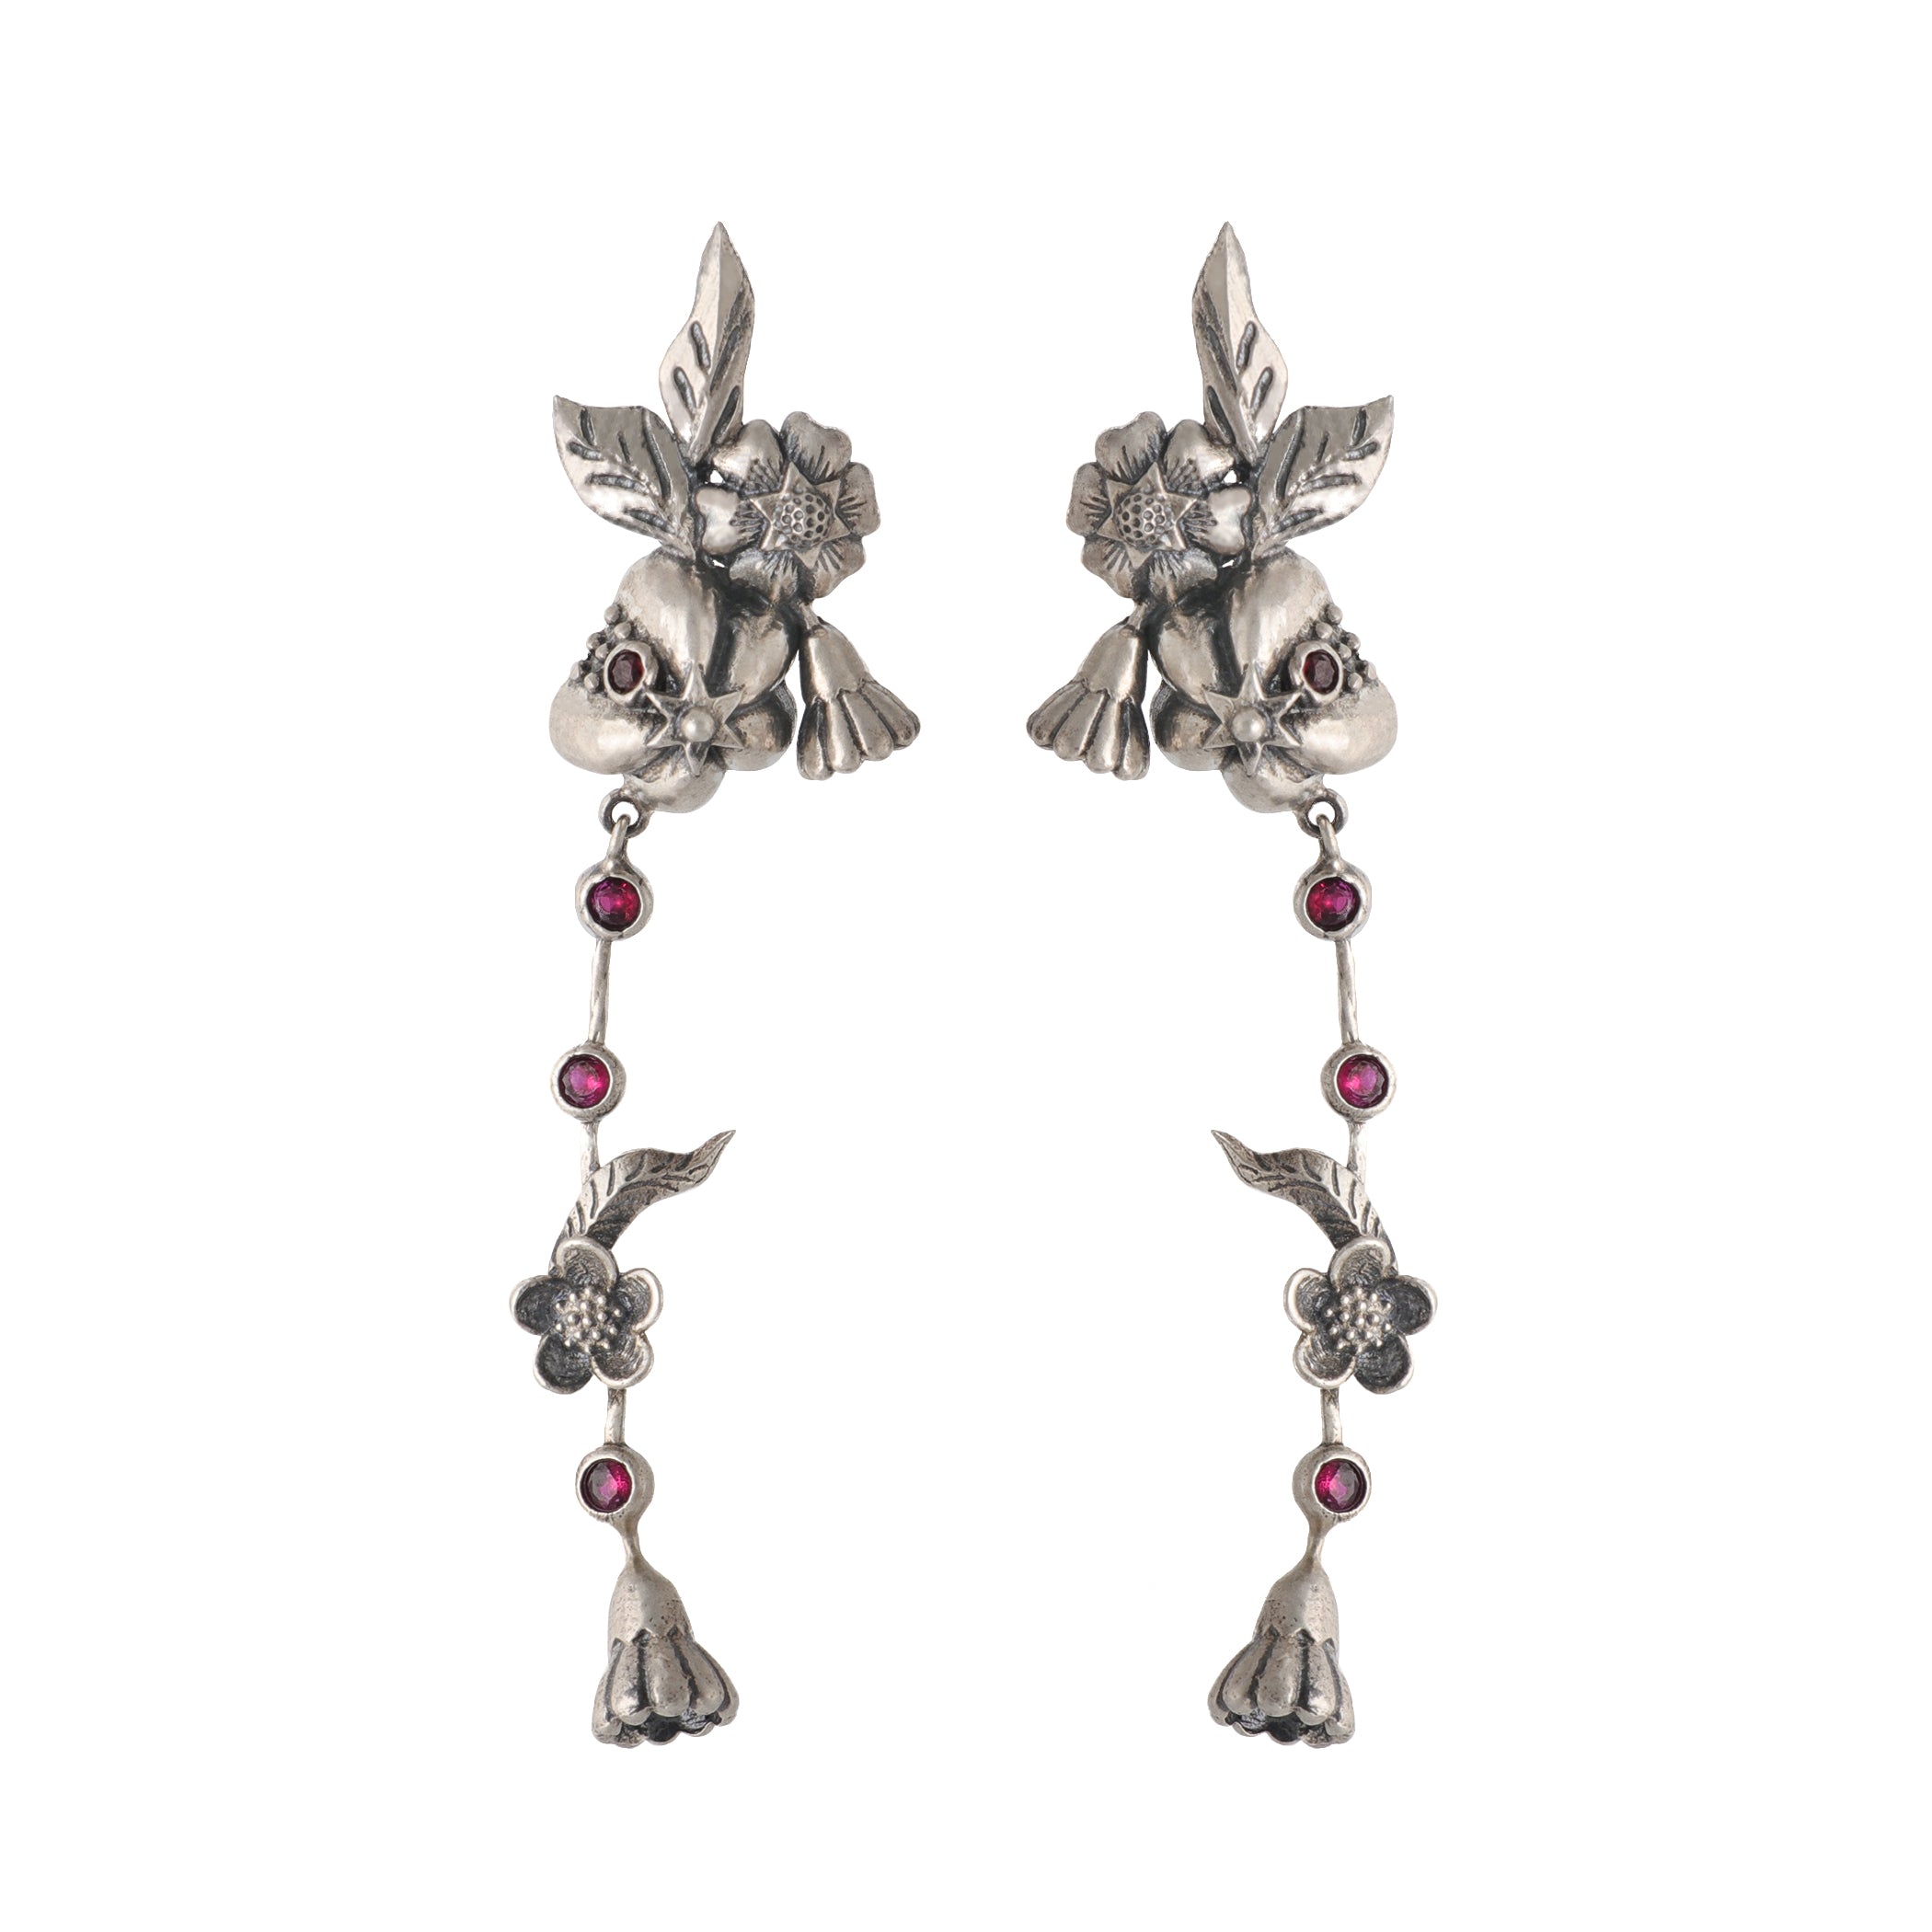 William Morris Blossom Silver Earrings By Moha